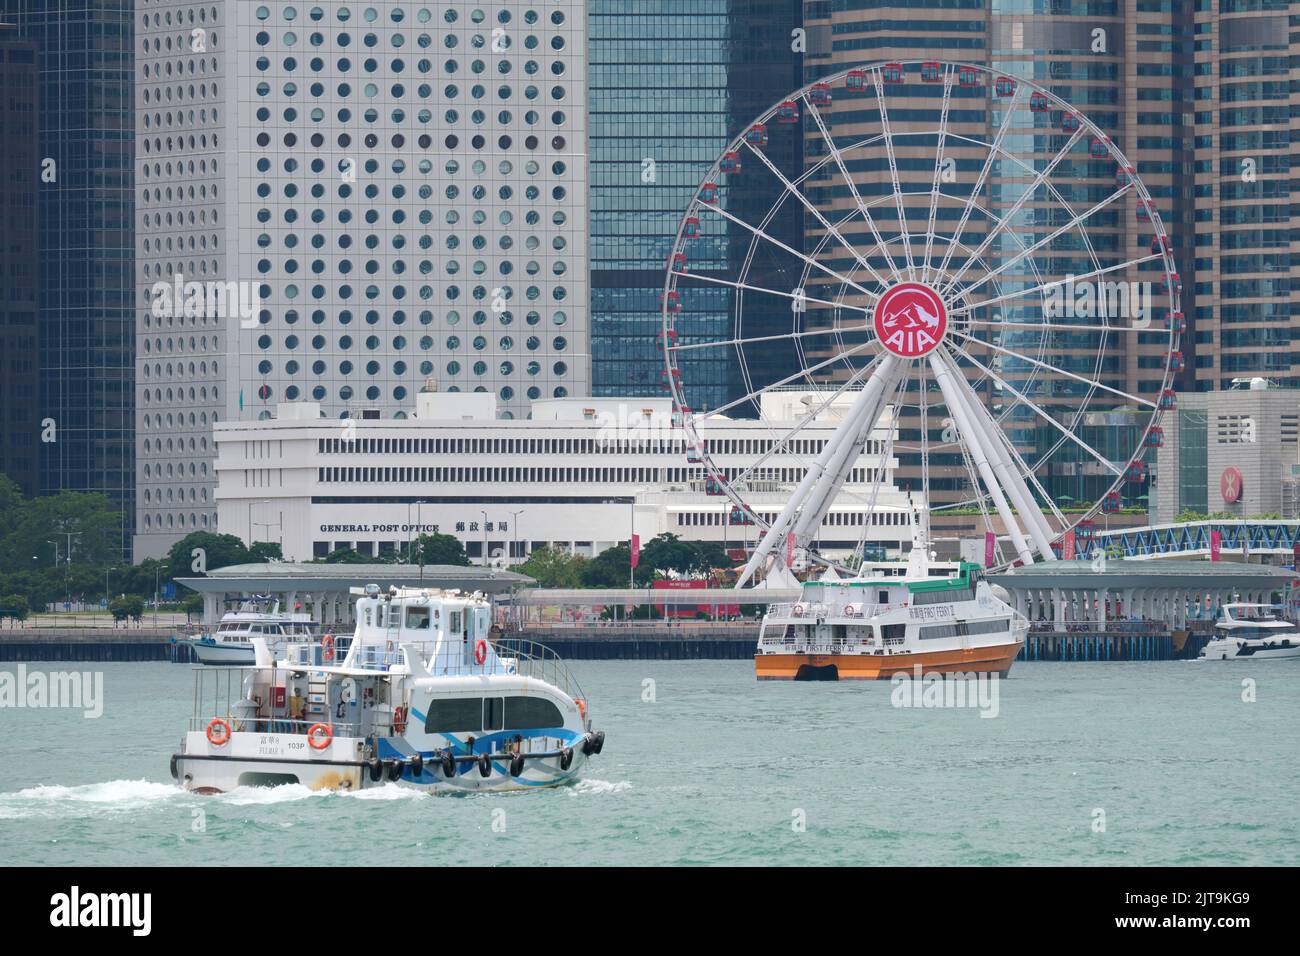 The Ferris wheel in Central, Hong Kong with commercial buildings Stock Photo